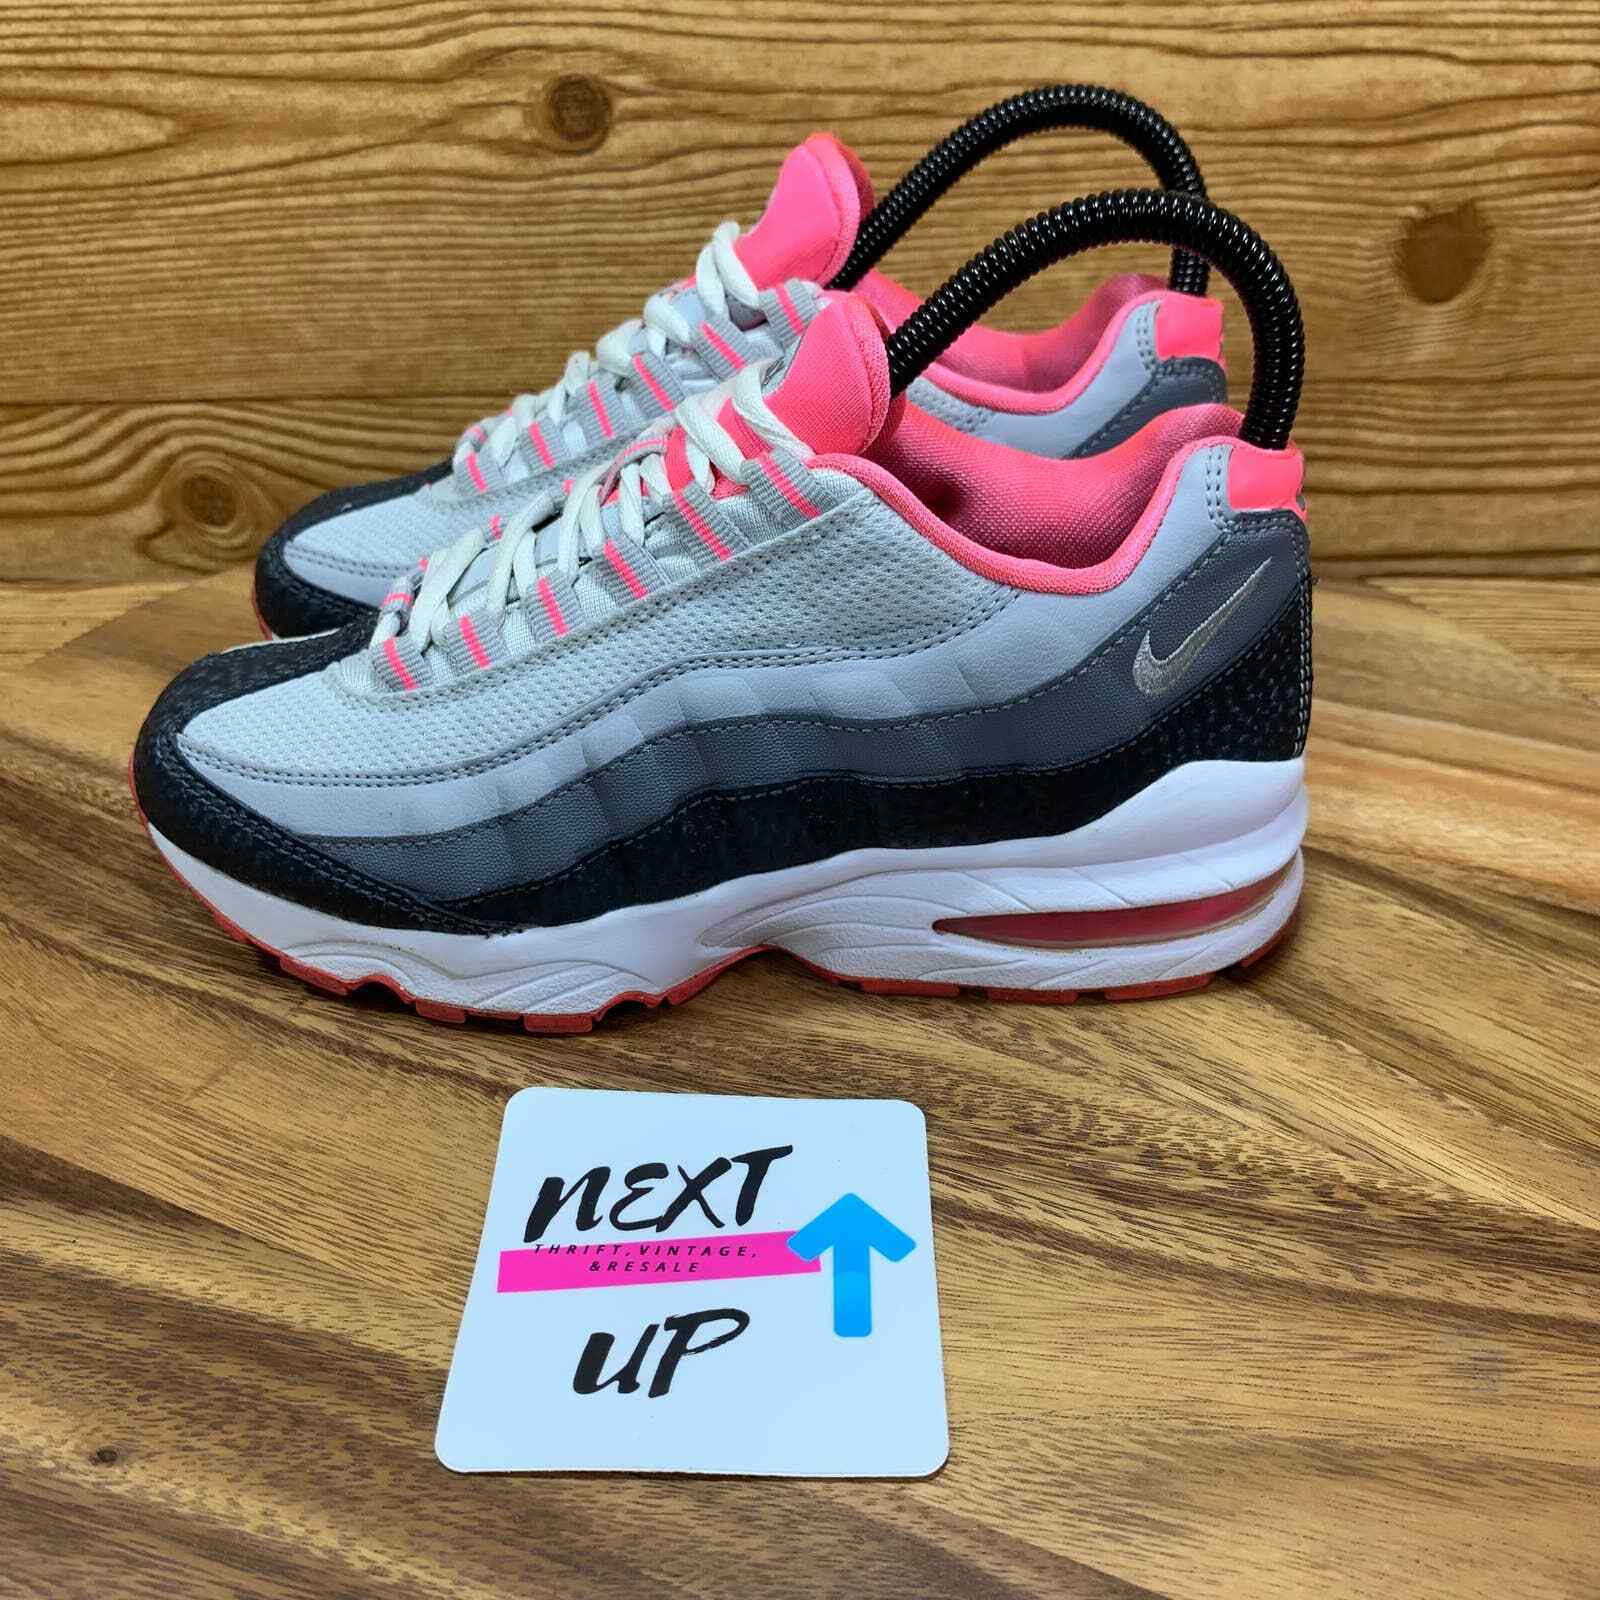 Nike Air Max 95 LE Pink Girls Athletic Sneakers Kids Shoes size 4 Youth EUC Cute